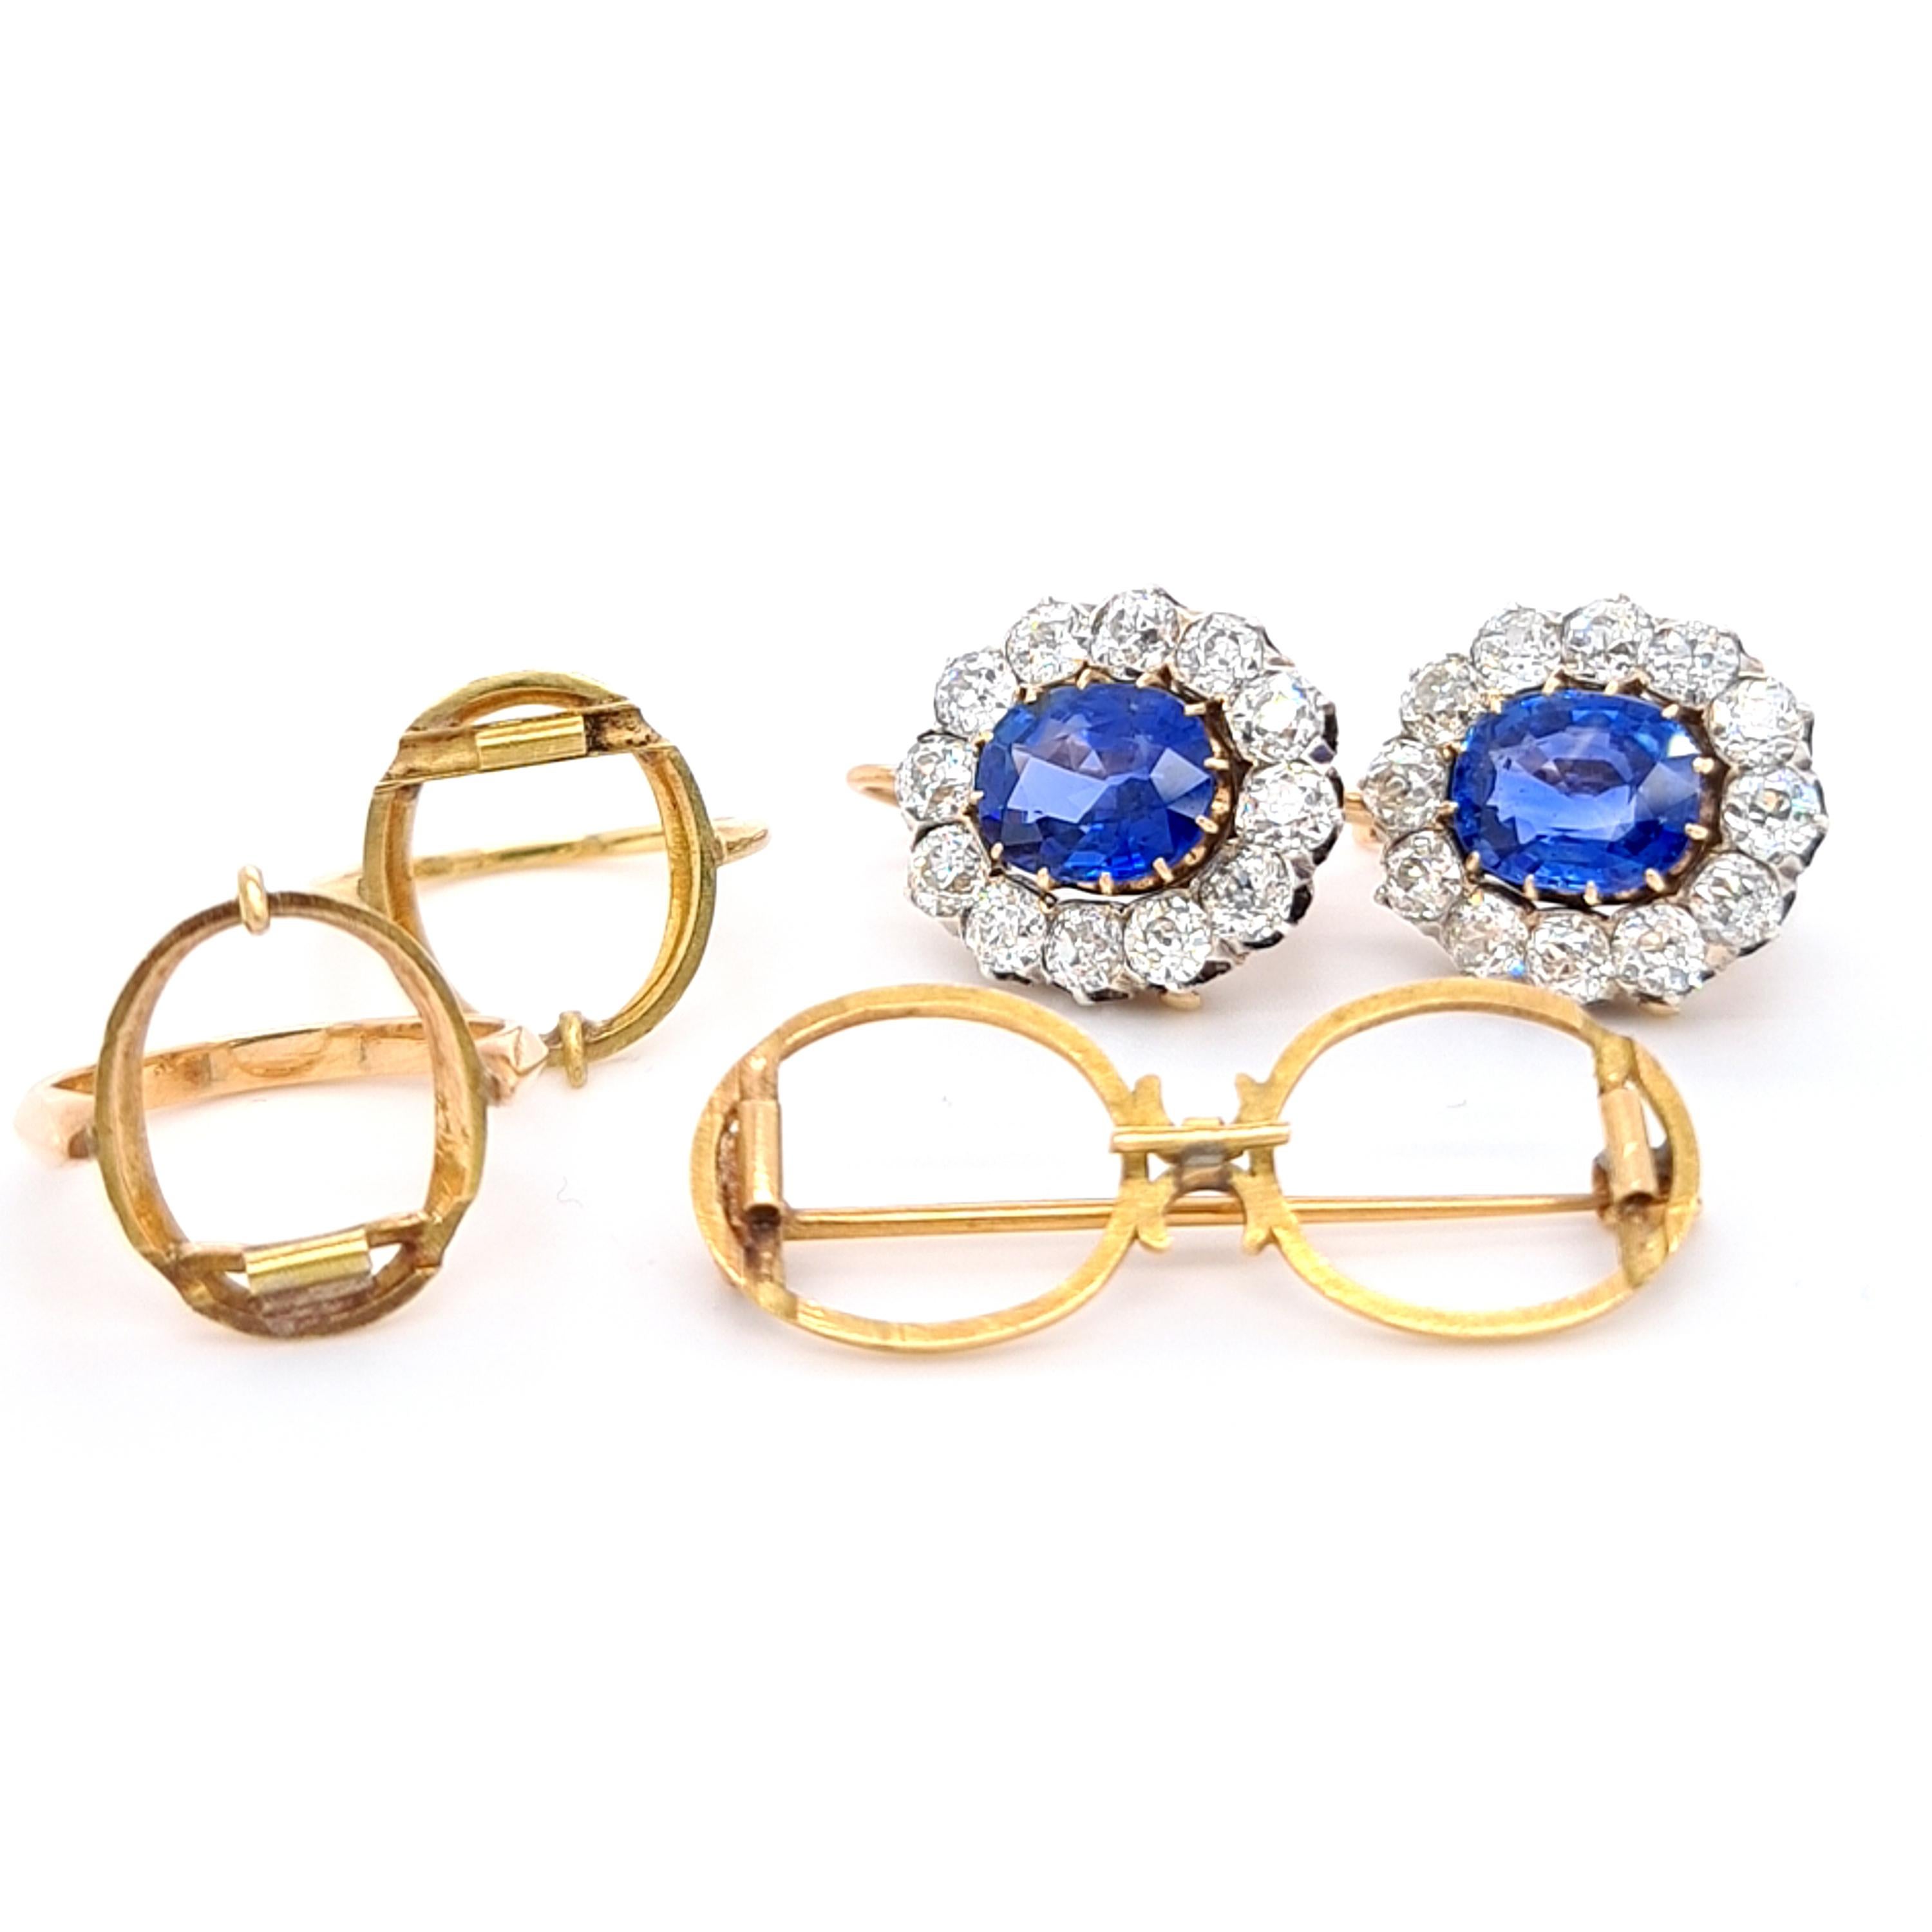 Sapphire And Diamond Cluster Earrings, Platinum And Gold, Circa 1890 For Sale 1